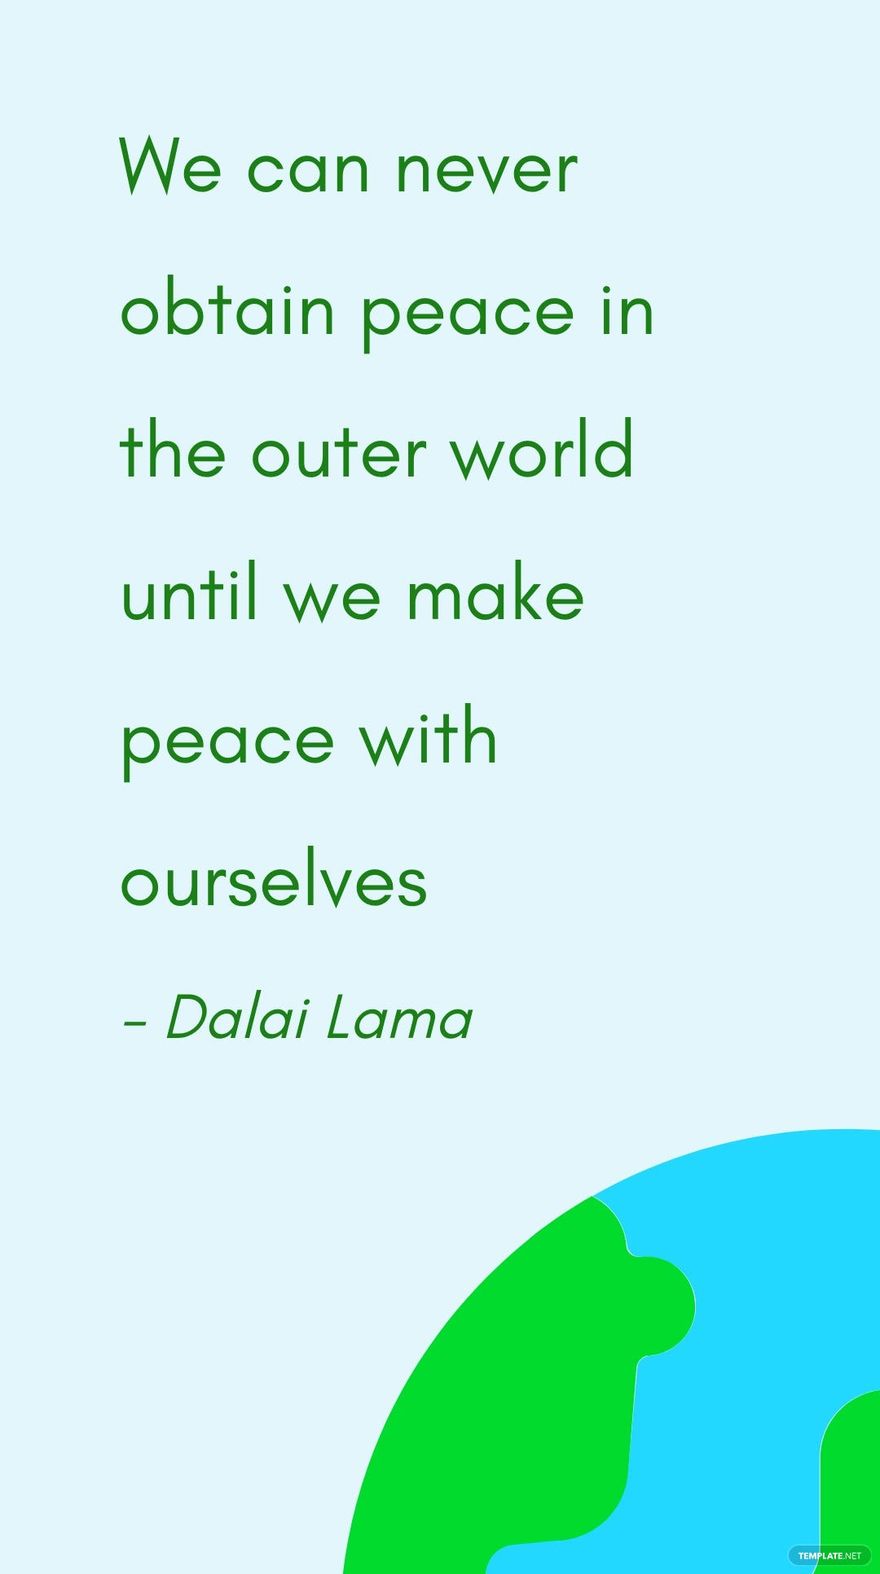 Dalai Lama - We can never obtain peace in the outer world until we make peace with ourselves